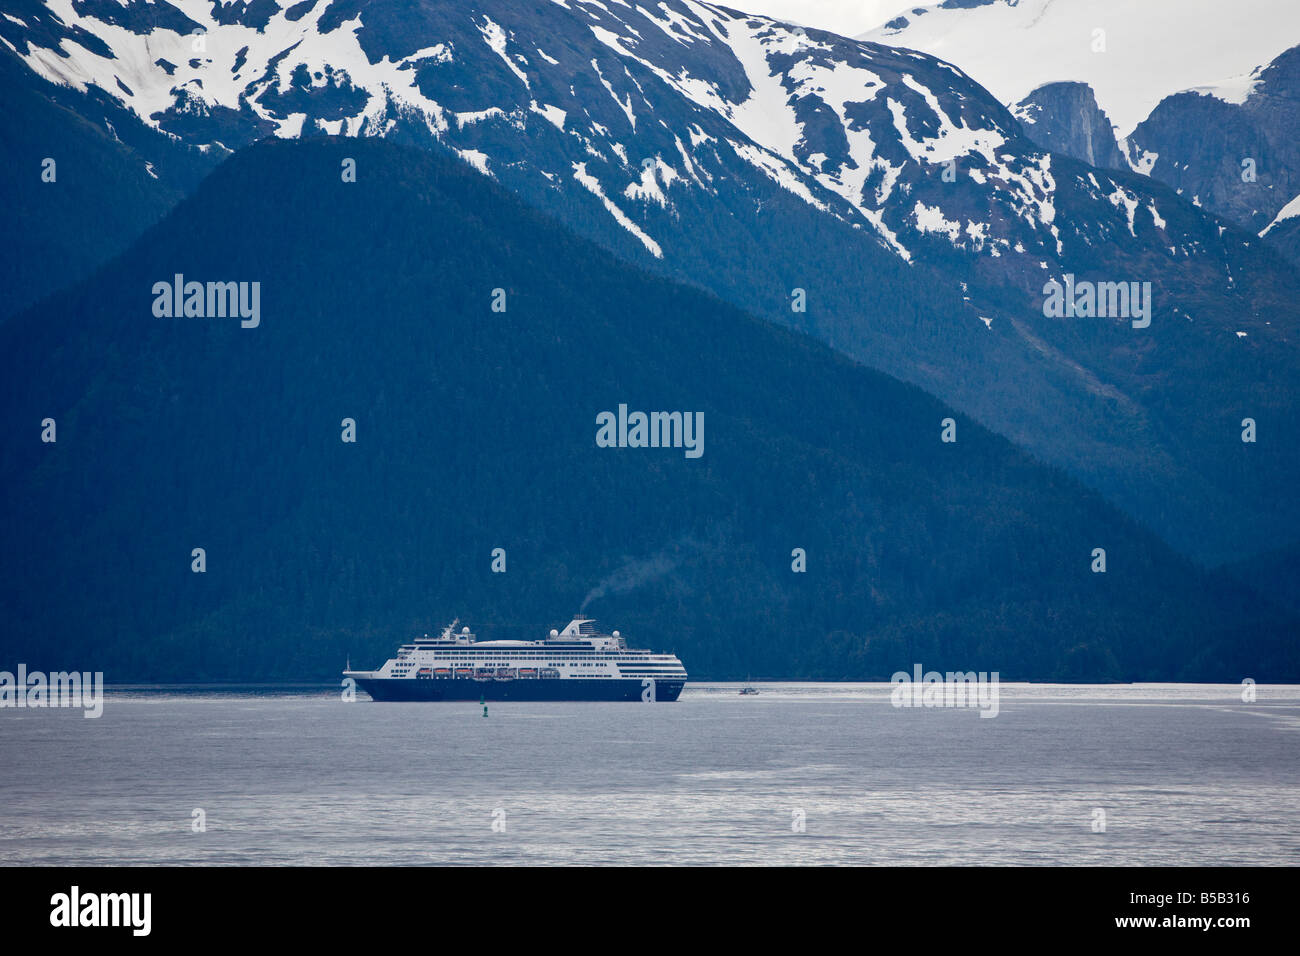 Cruise ship sailing the Inside Passage between Seattle and Alaska in front of snow capped mountains Stock Photo